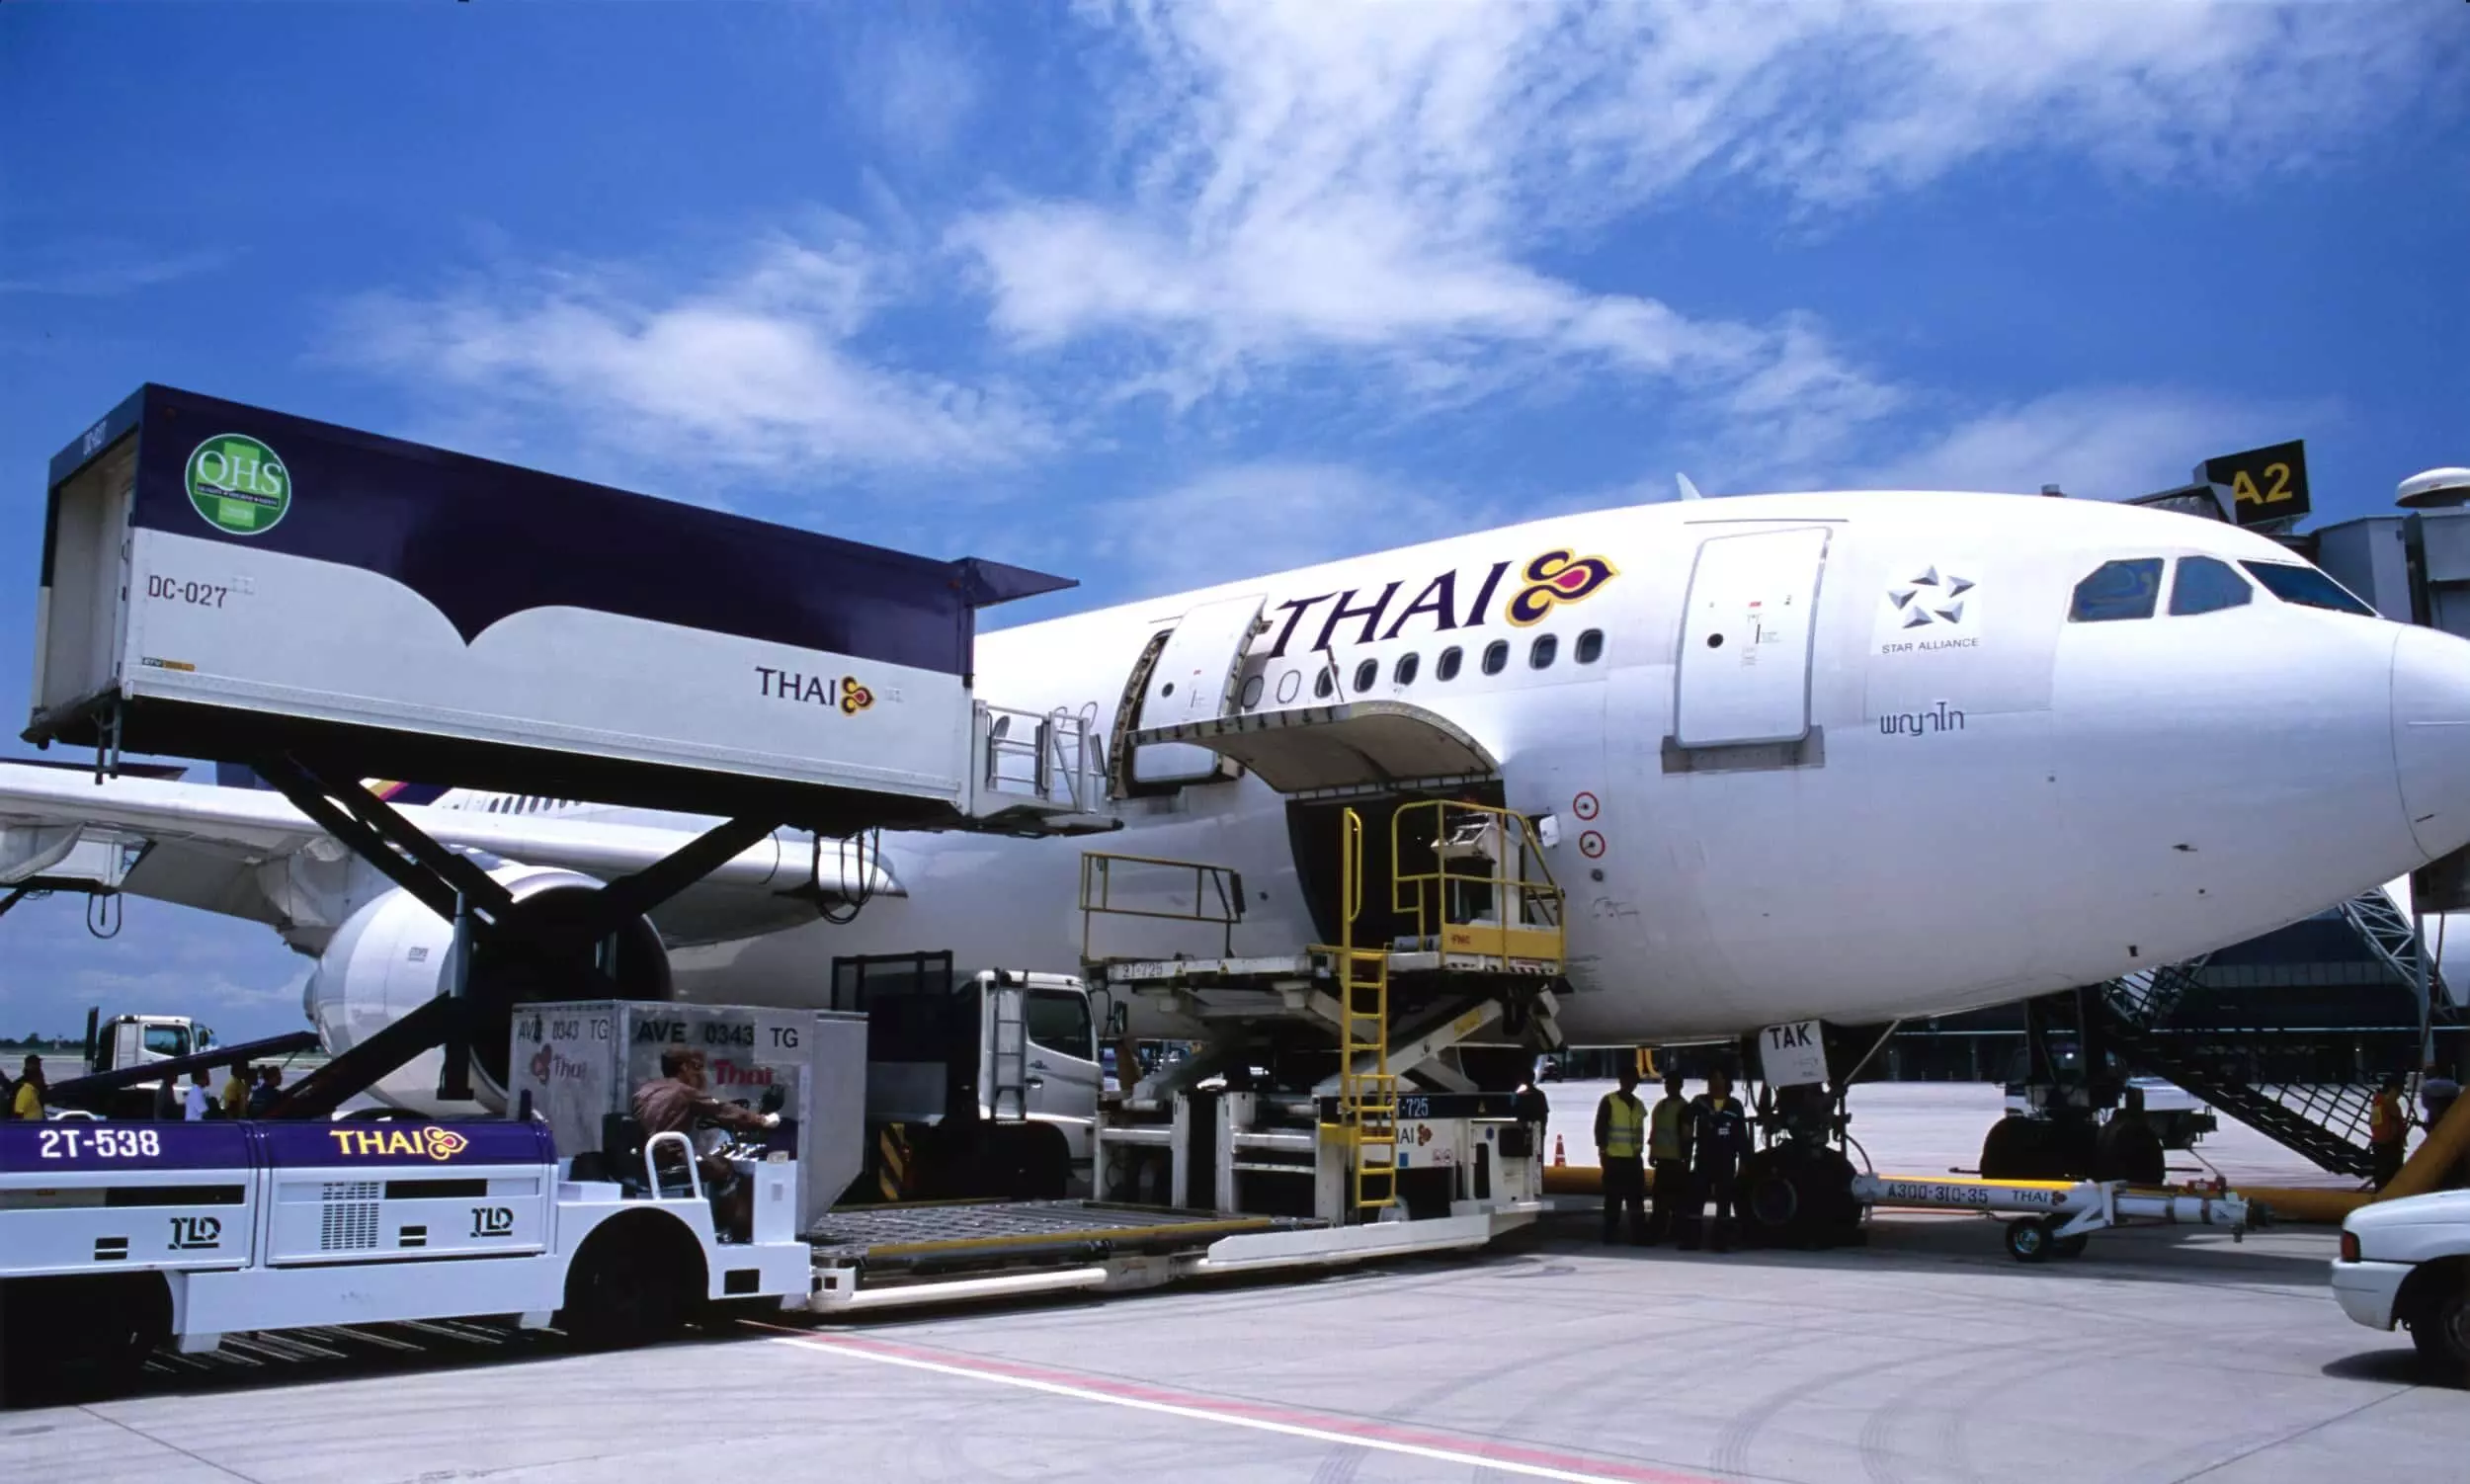 Thai Airways renews contract with CHAMP for Traxon cargoHUB